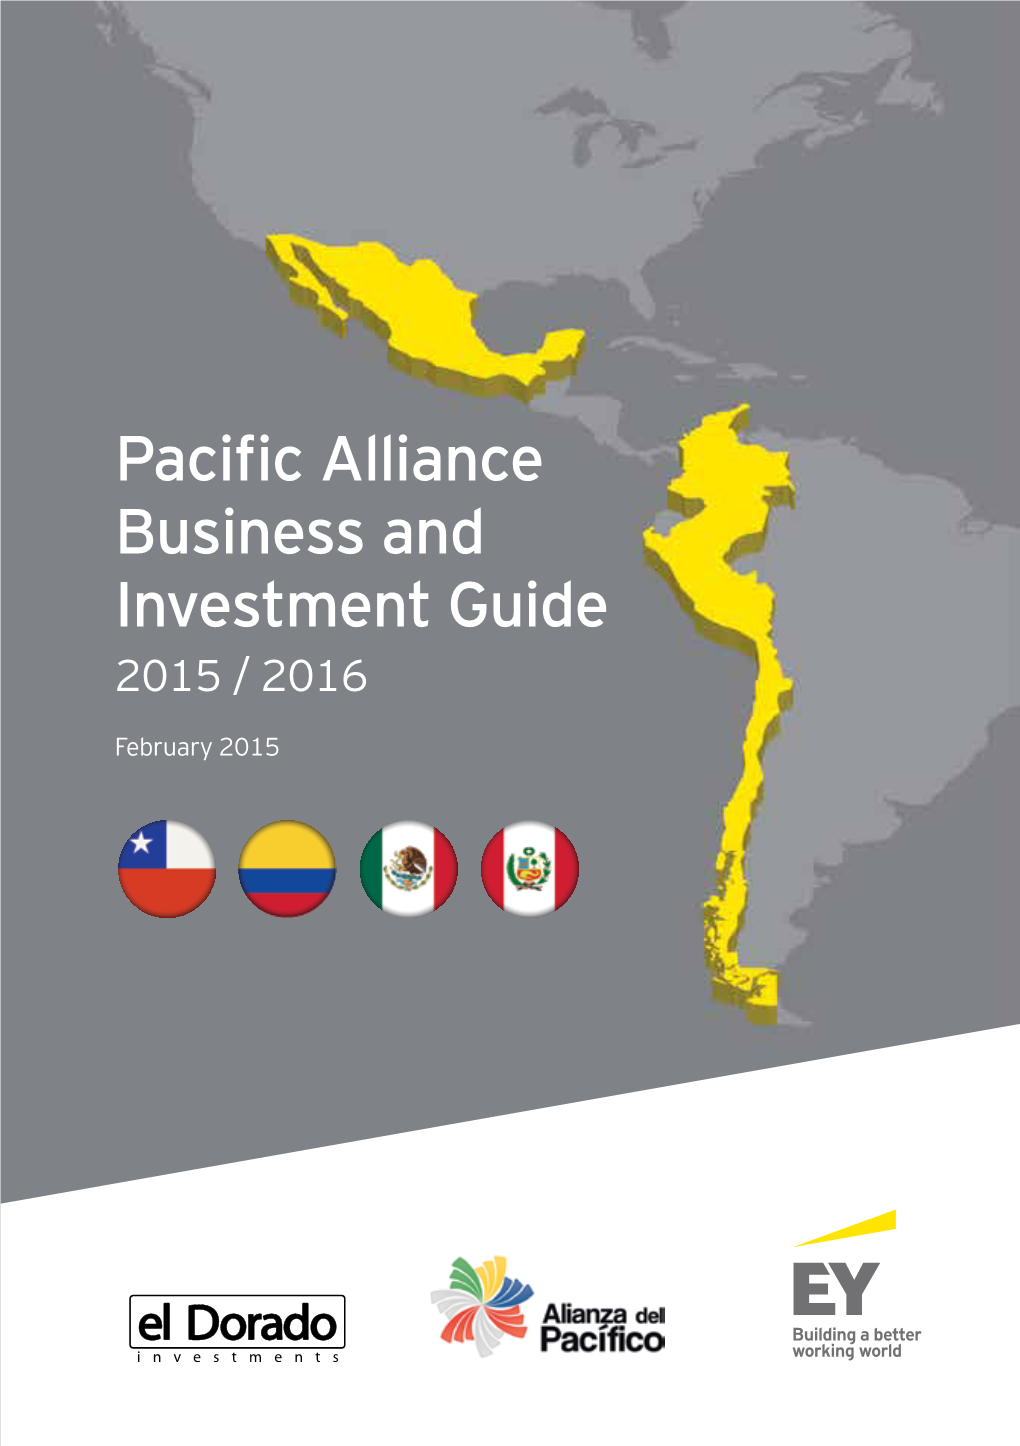 Pacific Alliance Business and Investment Guide 2015 / 2016